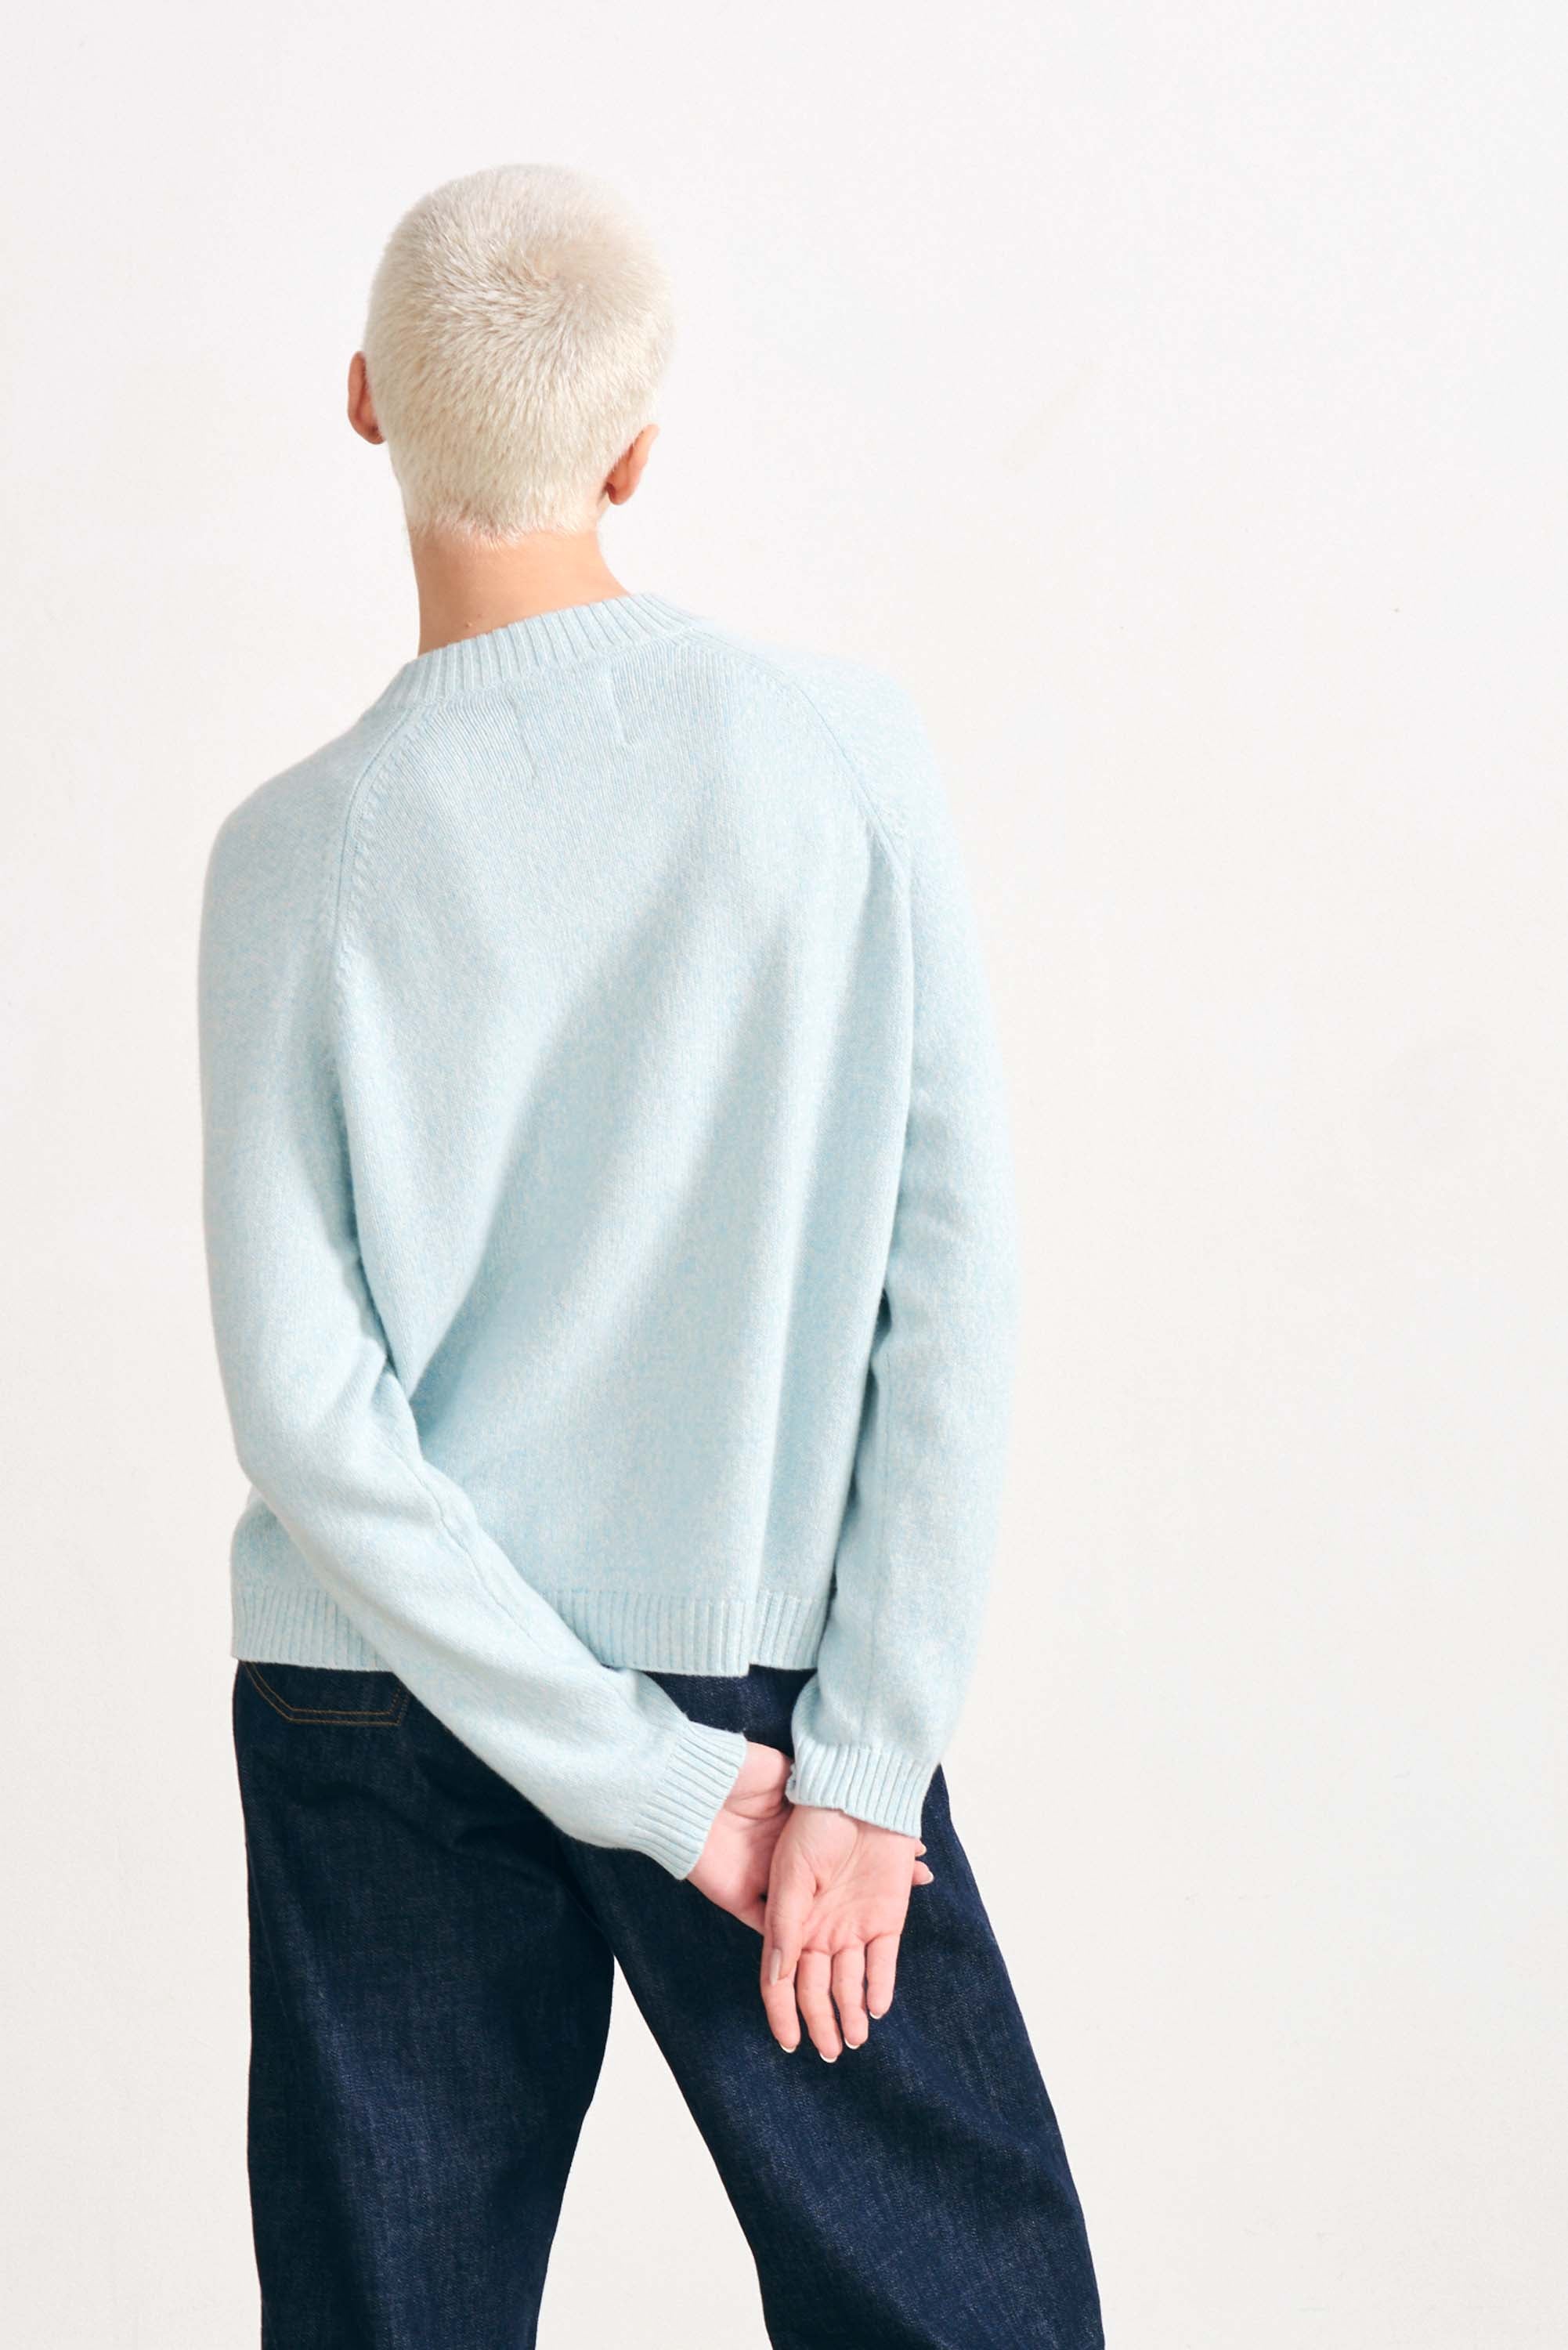 Blonde female model wearing Jumper 1234 cashmere and wool heavier weight round neck cardigan in ice blue marl facing away from the camera